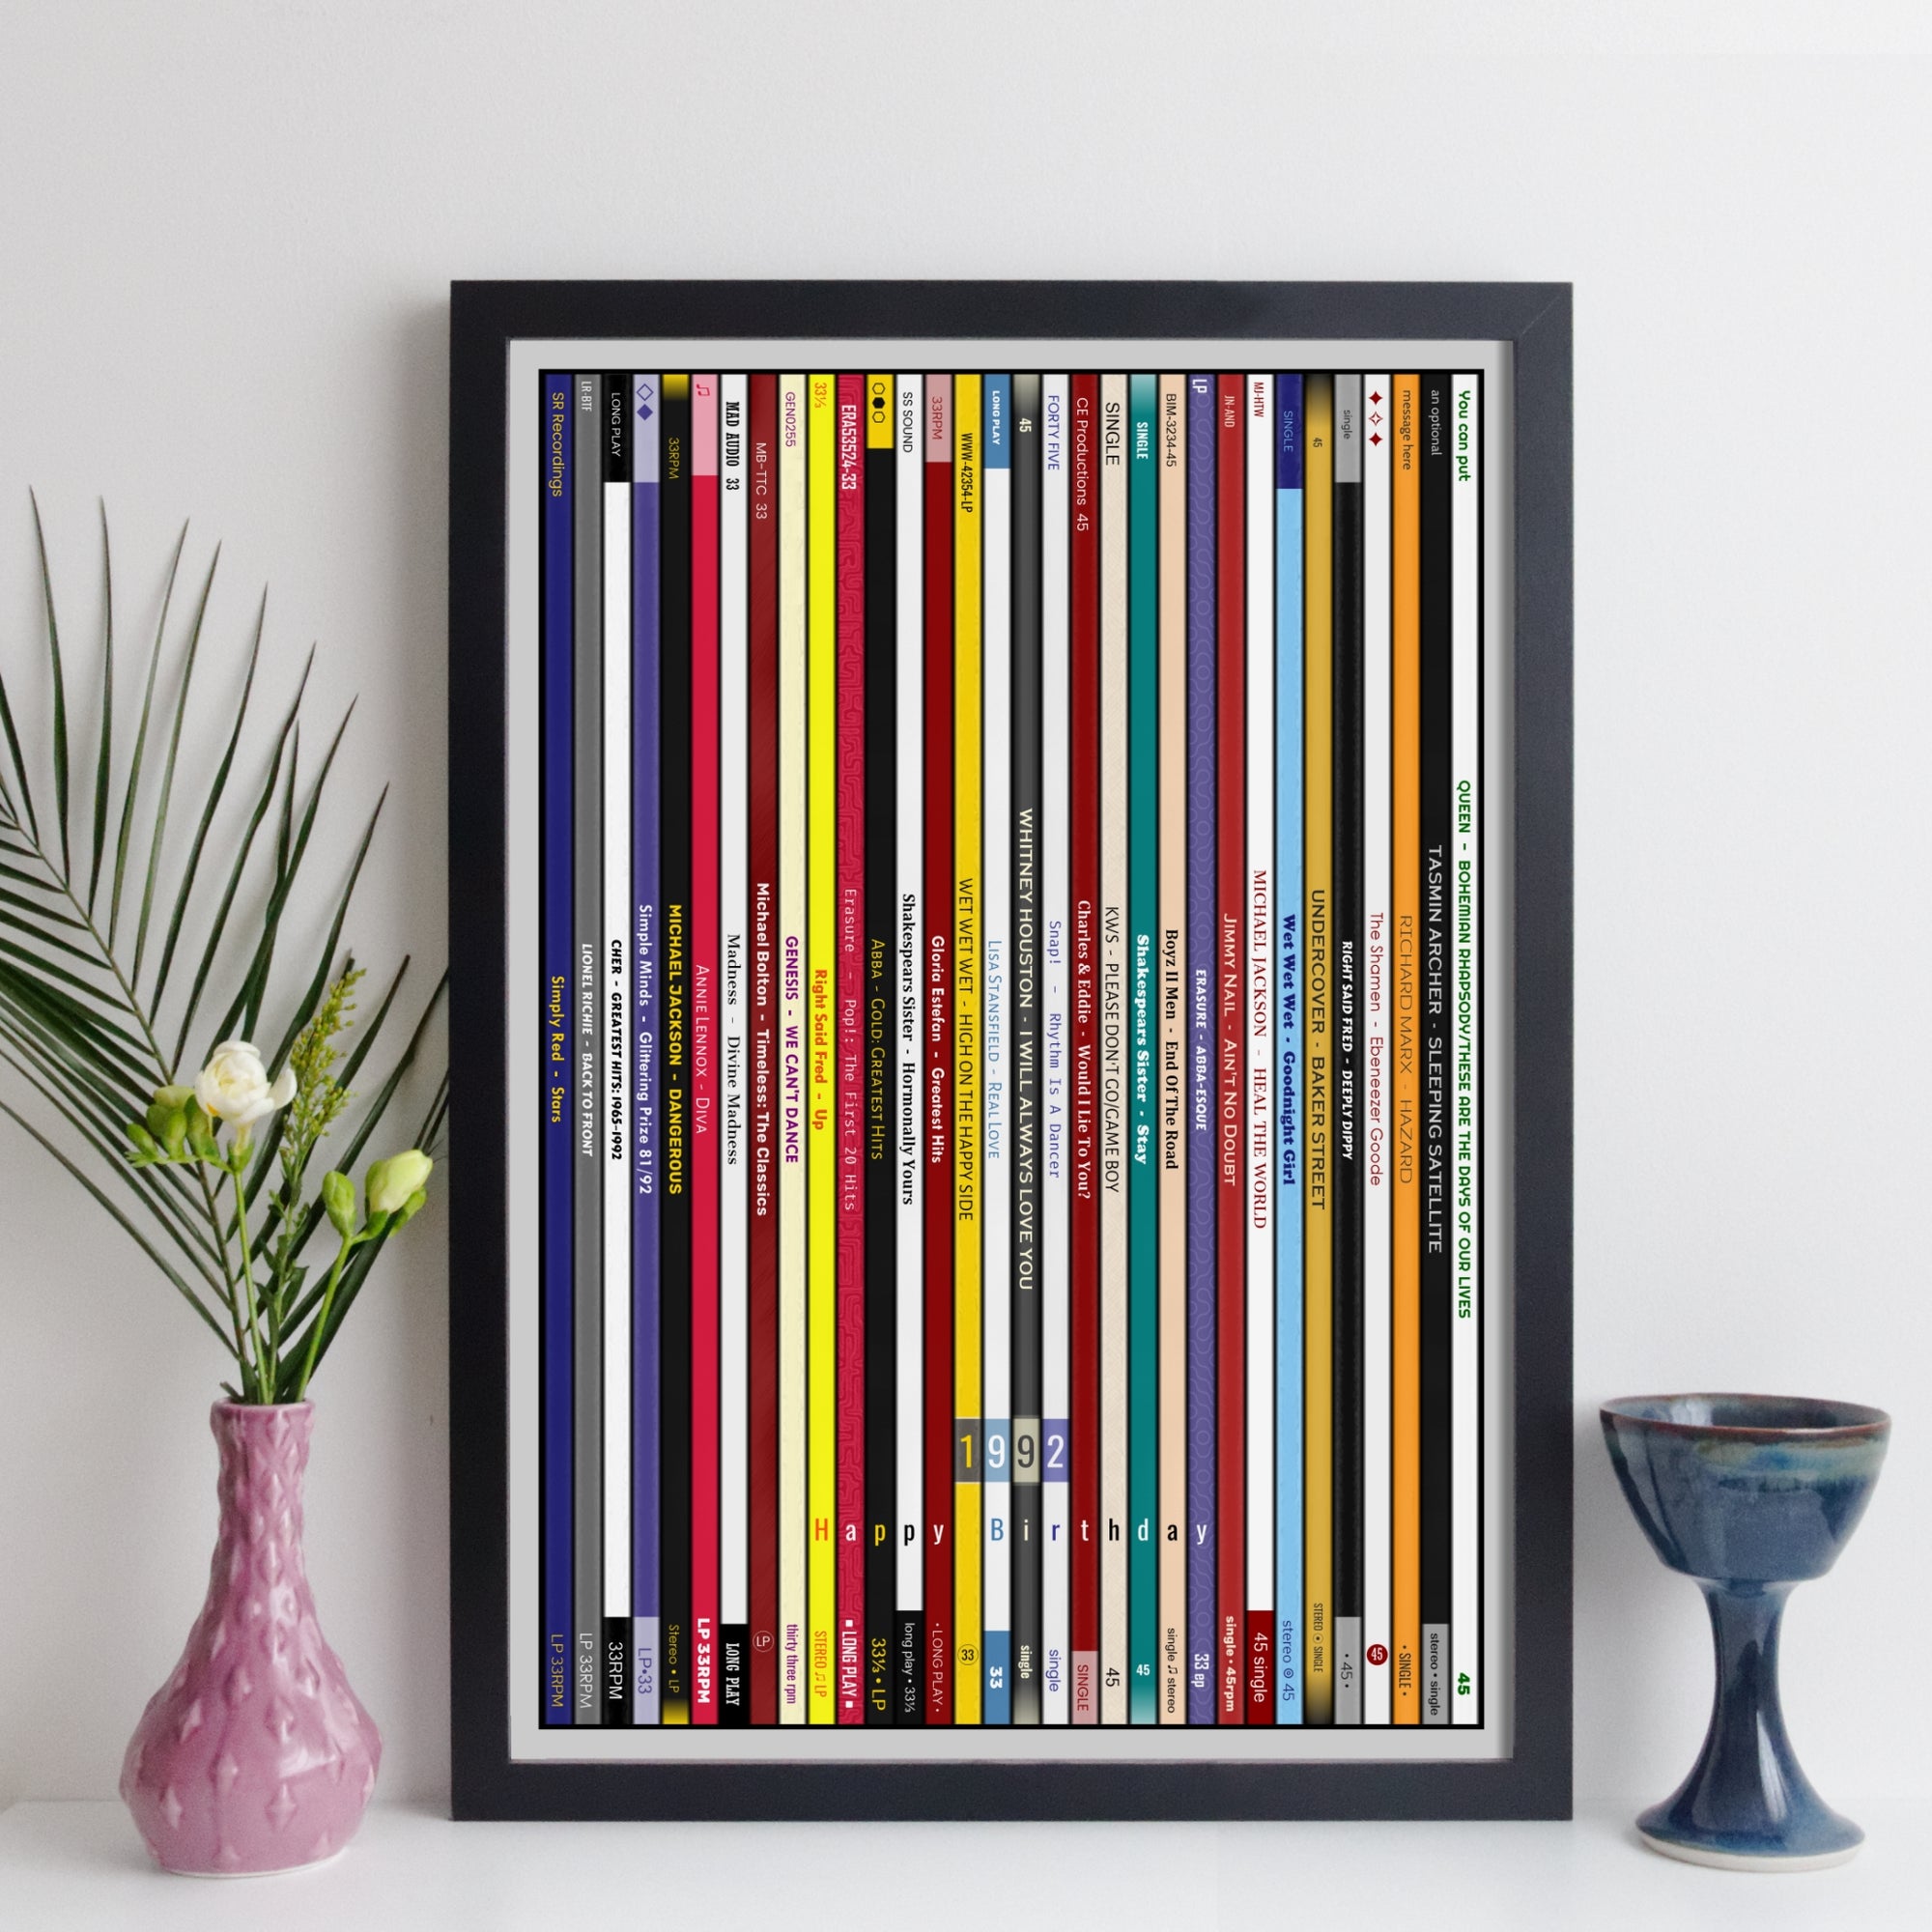 Personalised Music Print - 1992 UK Record Collection Print - 1992 birthday gift idea